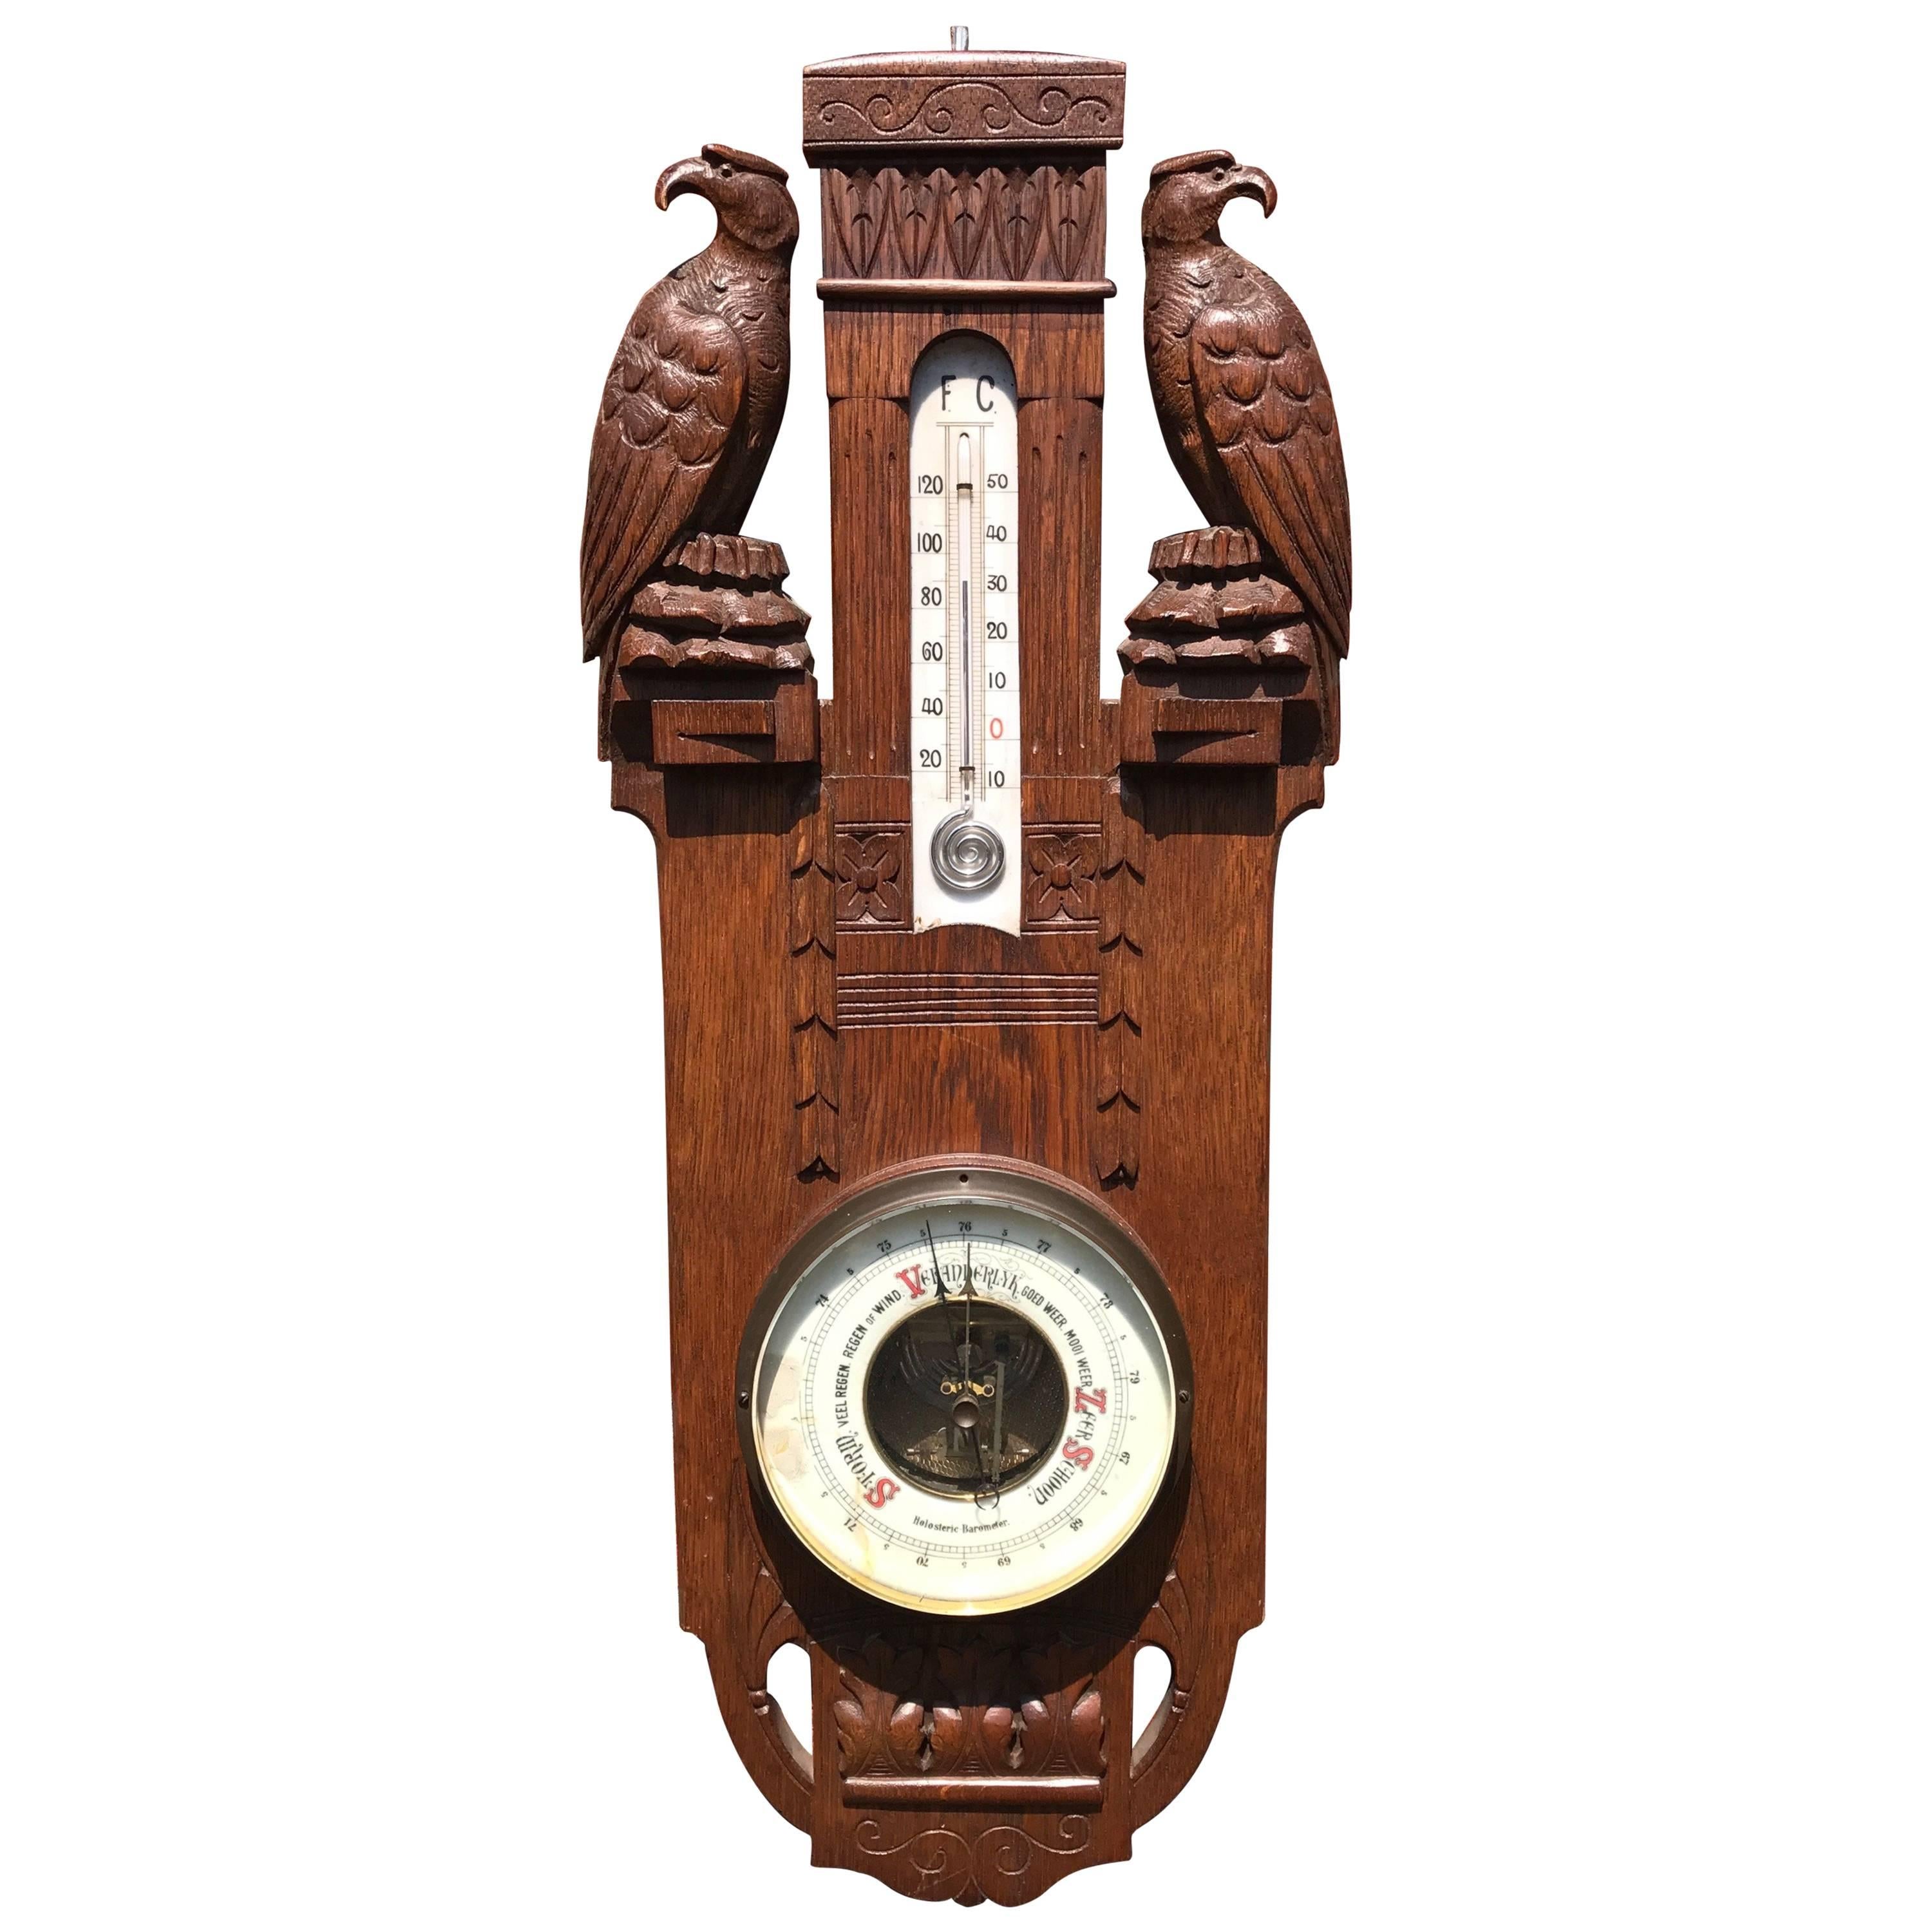 Unique Arts & Crafts Hand Carved Wall Barometer with Eagle Sculptures